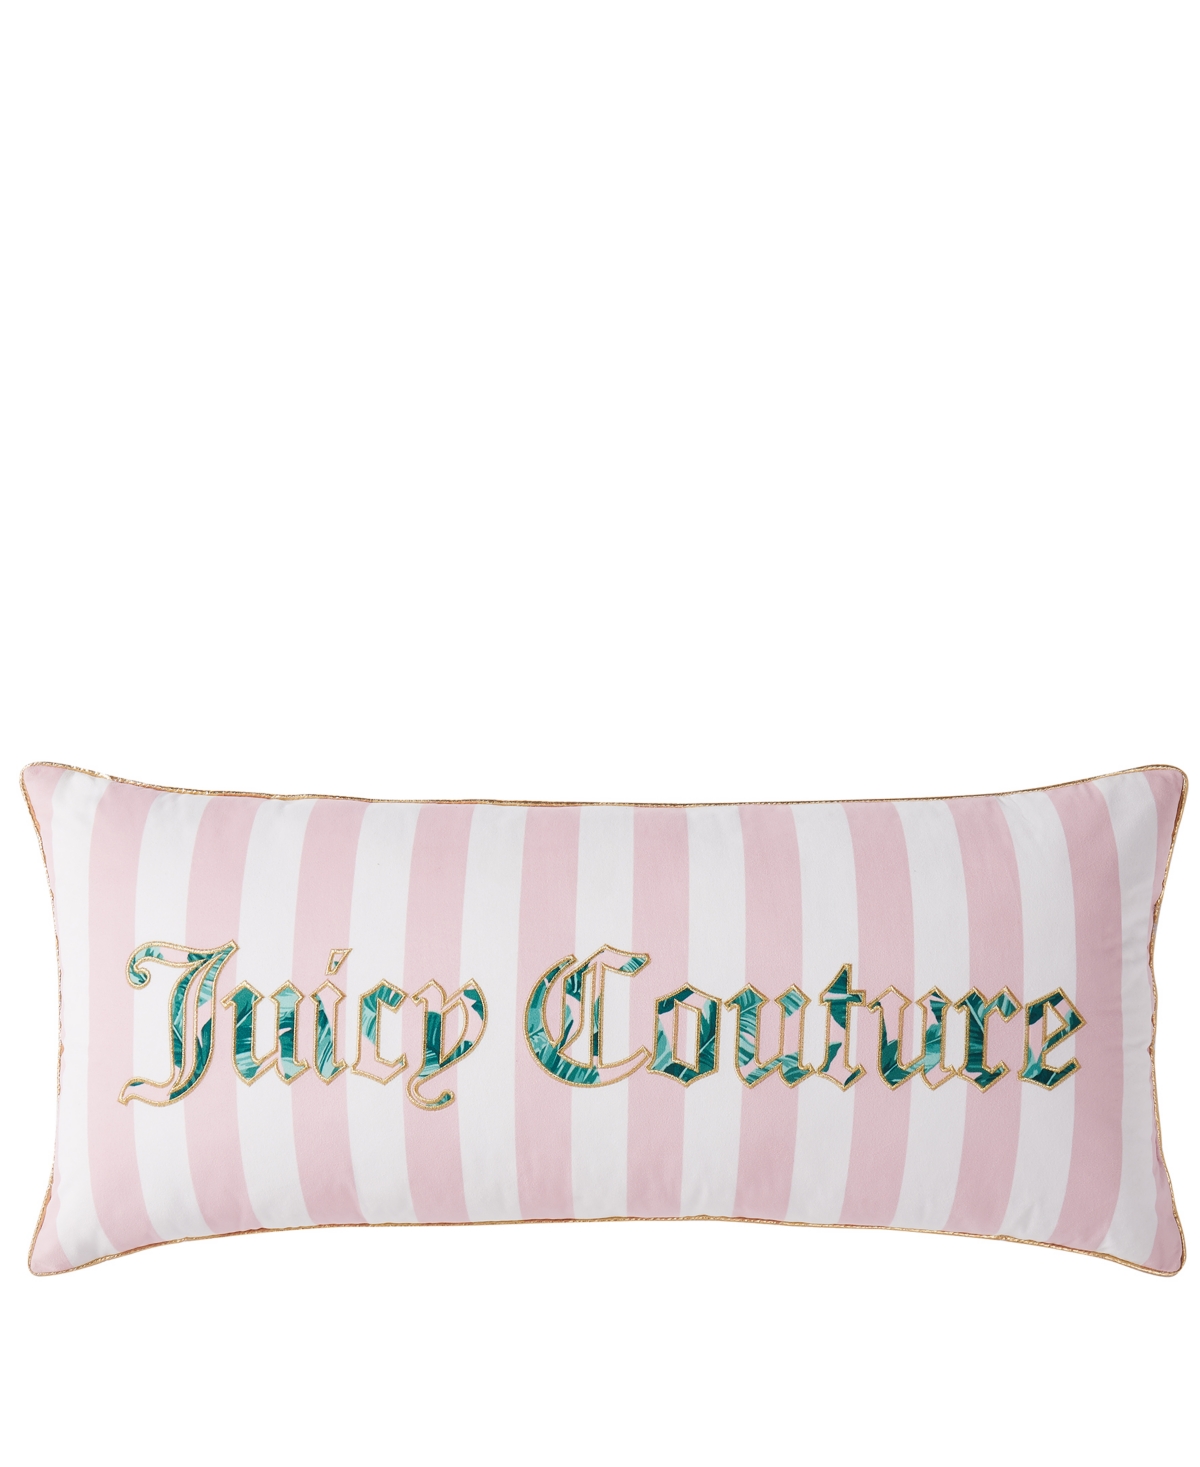 Juicy Couture Silver-tone Rhinestone Decorative Pillow, 16" X 36" In Pink